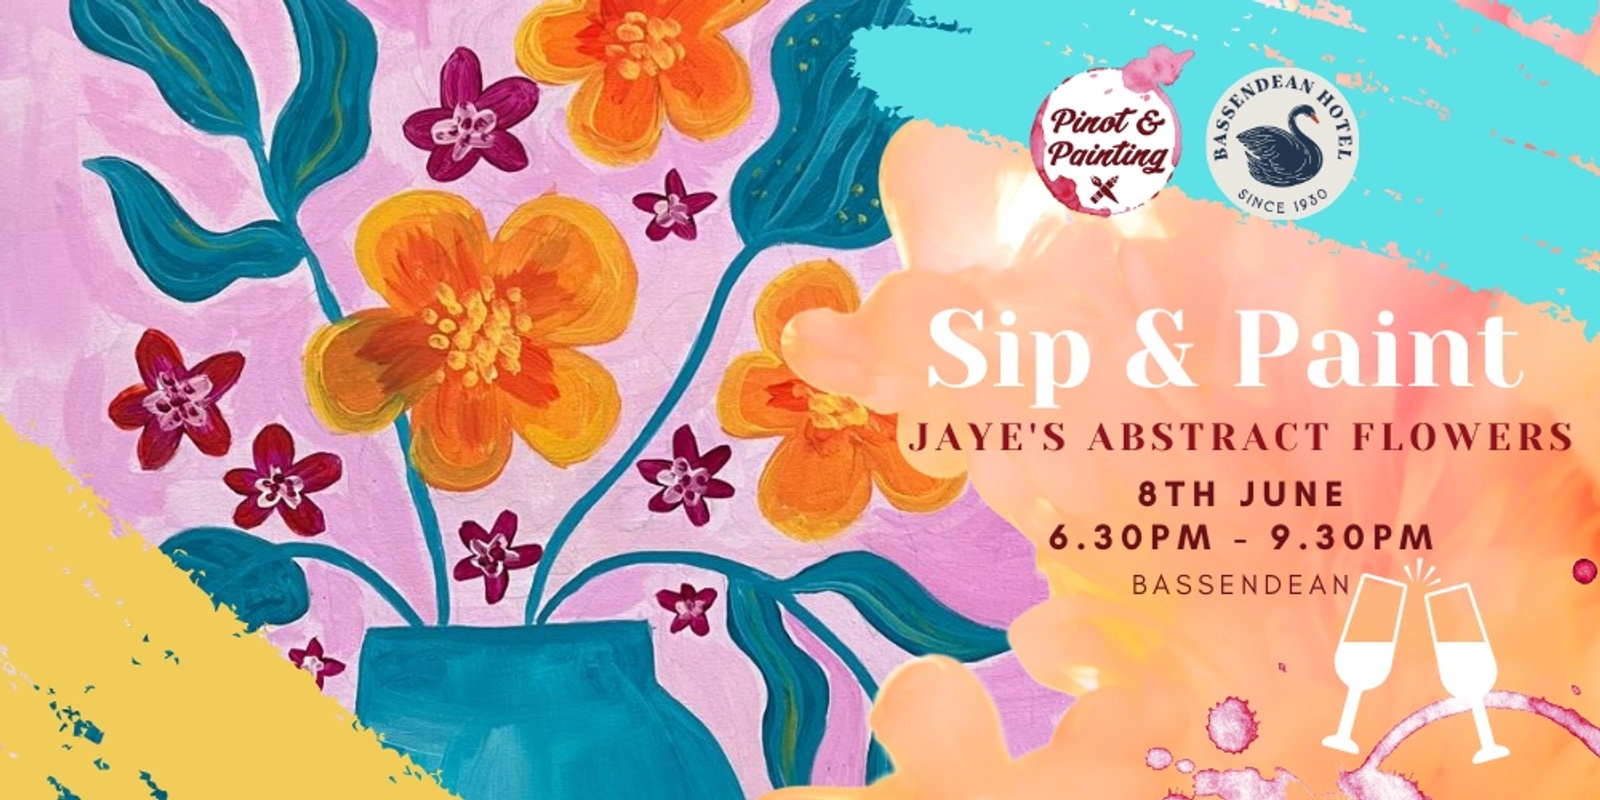 Banner image for Jaye's Abstract Flowers  - Sip & Paint @ The Bassendean Hotel